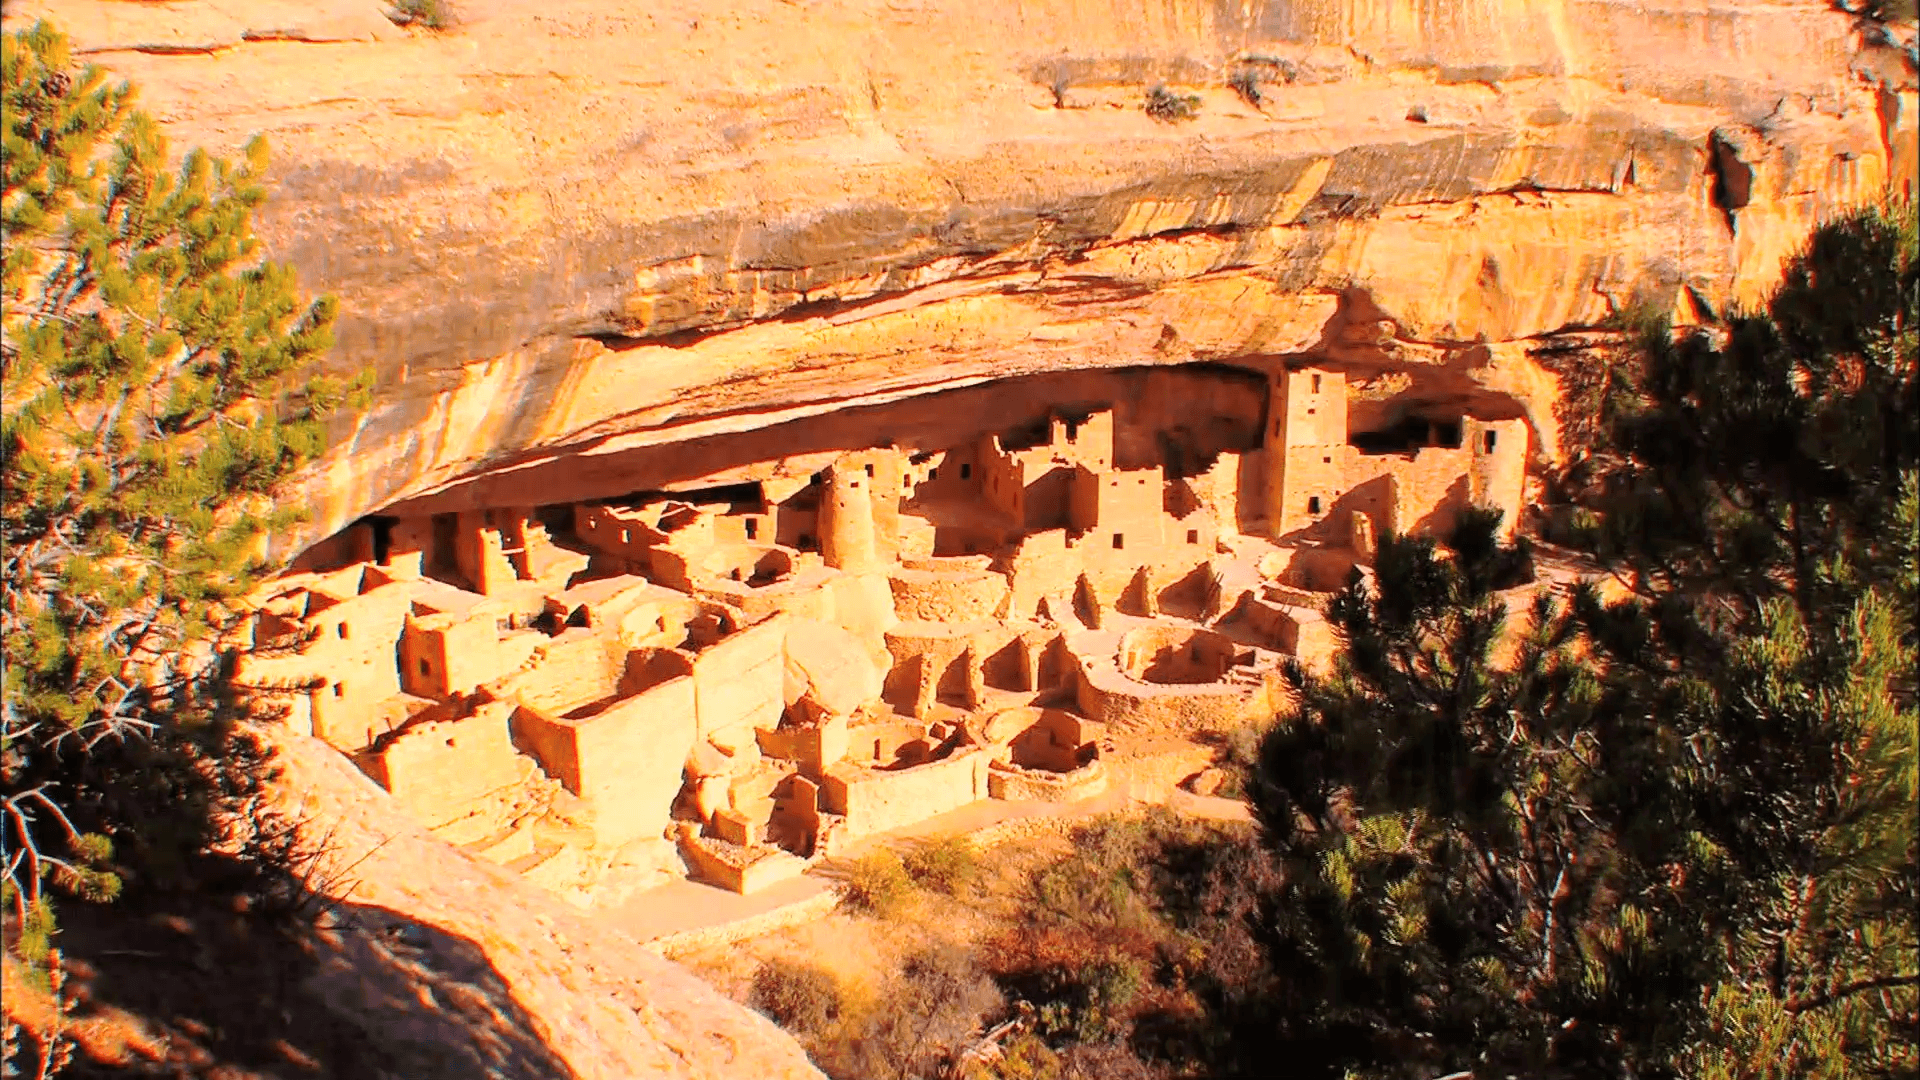 Mesa Verde National Park: A People's Past Etched in Stone. RV